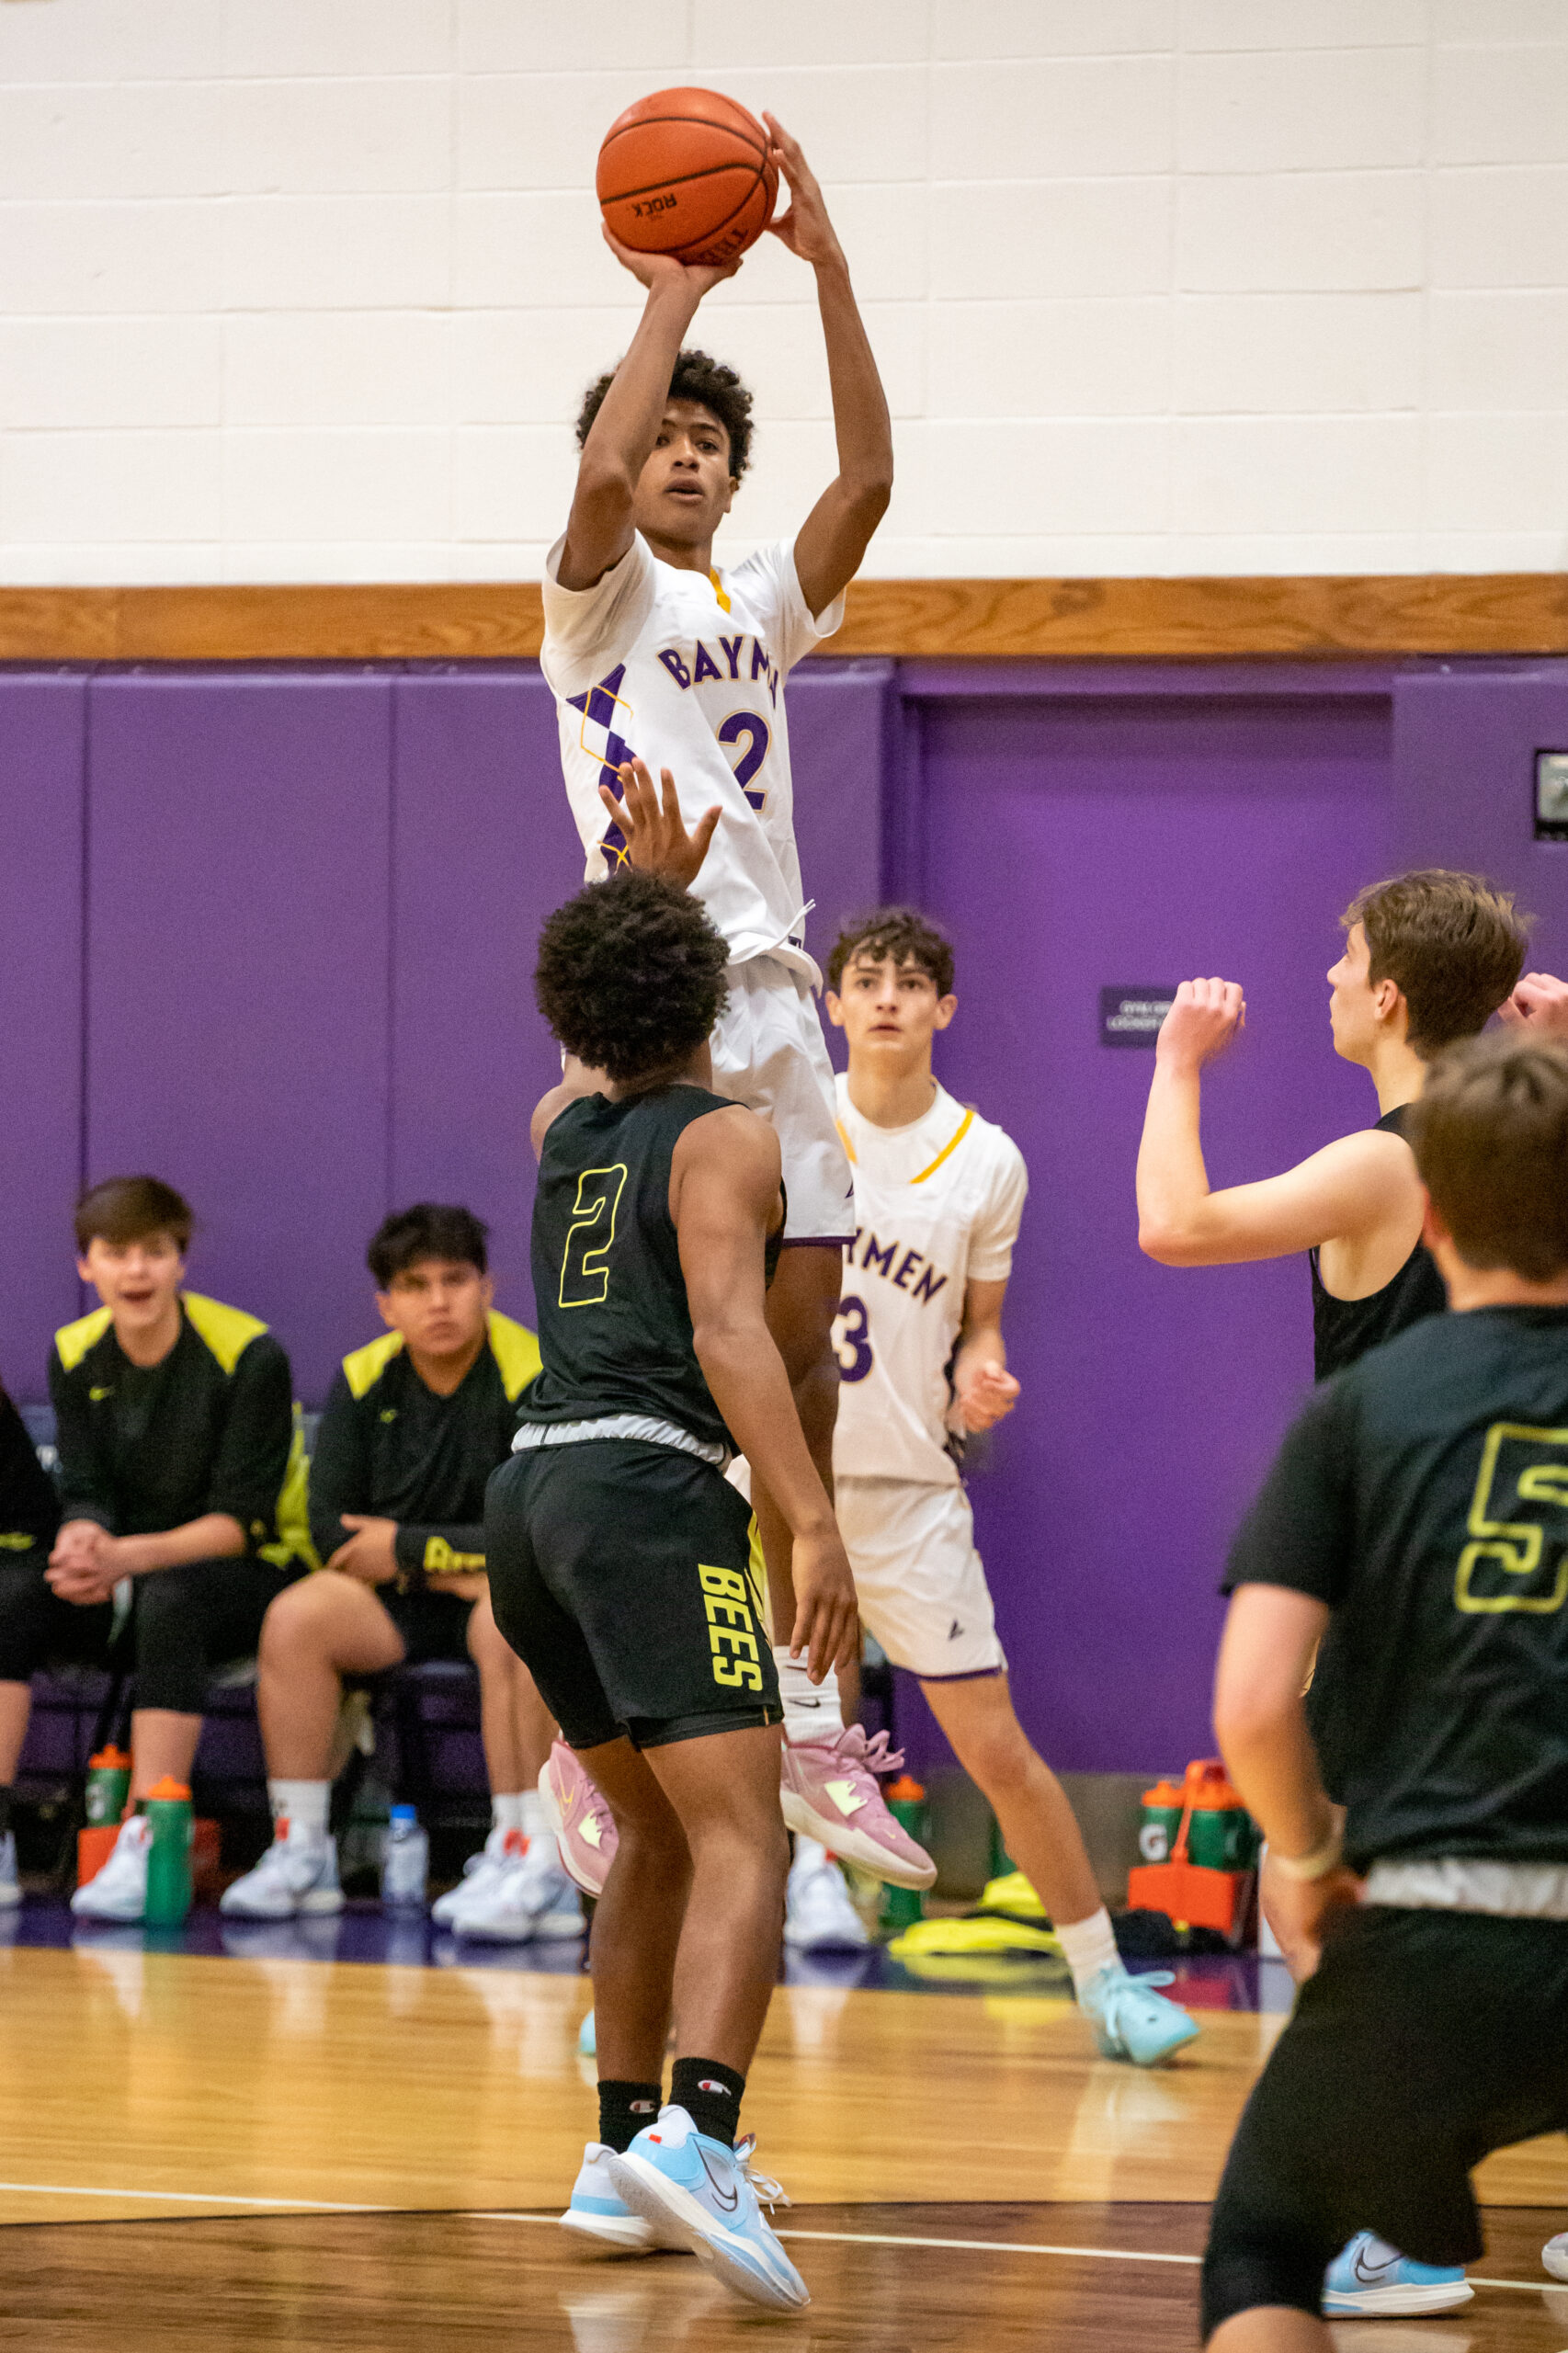 Senior Kazmin Johnson got the scoring started early for Hampton Bays, scoring one of the game's first baskets. He finished with a game-high 29 points.   MICHAEL O'CONNOR